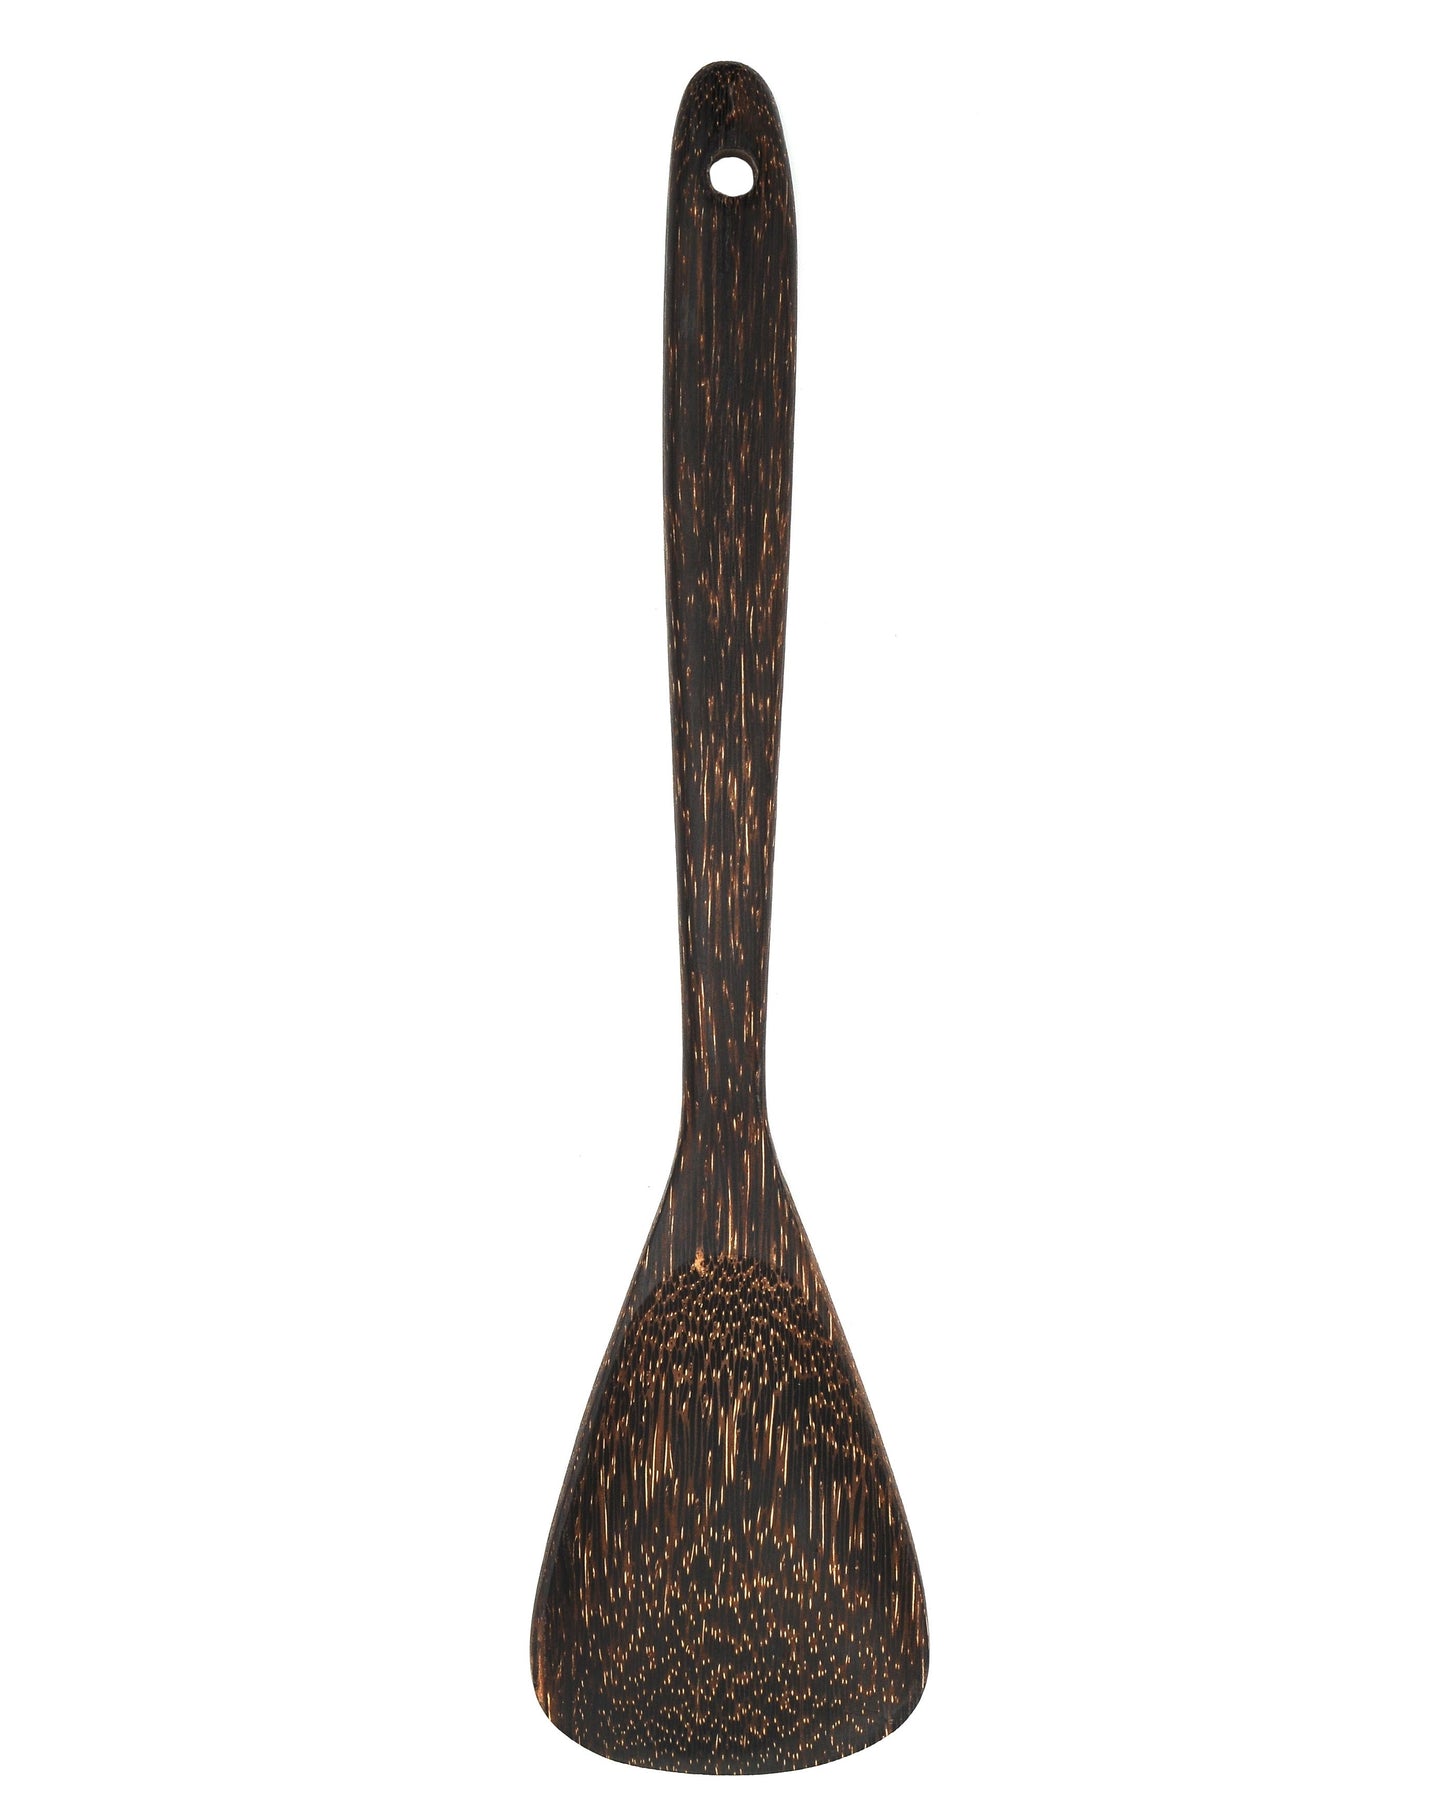 A Handcrafted Coconut Wood Classic Spatula - A Naturally Beautiful Kitchen Tool